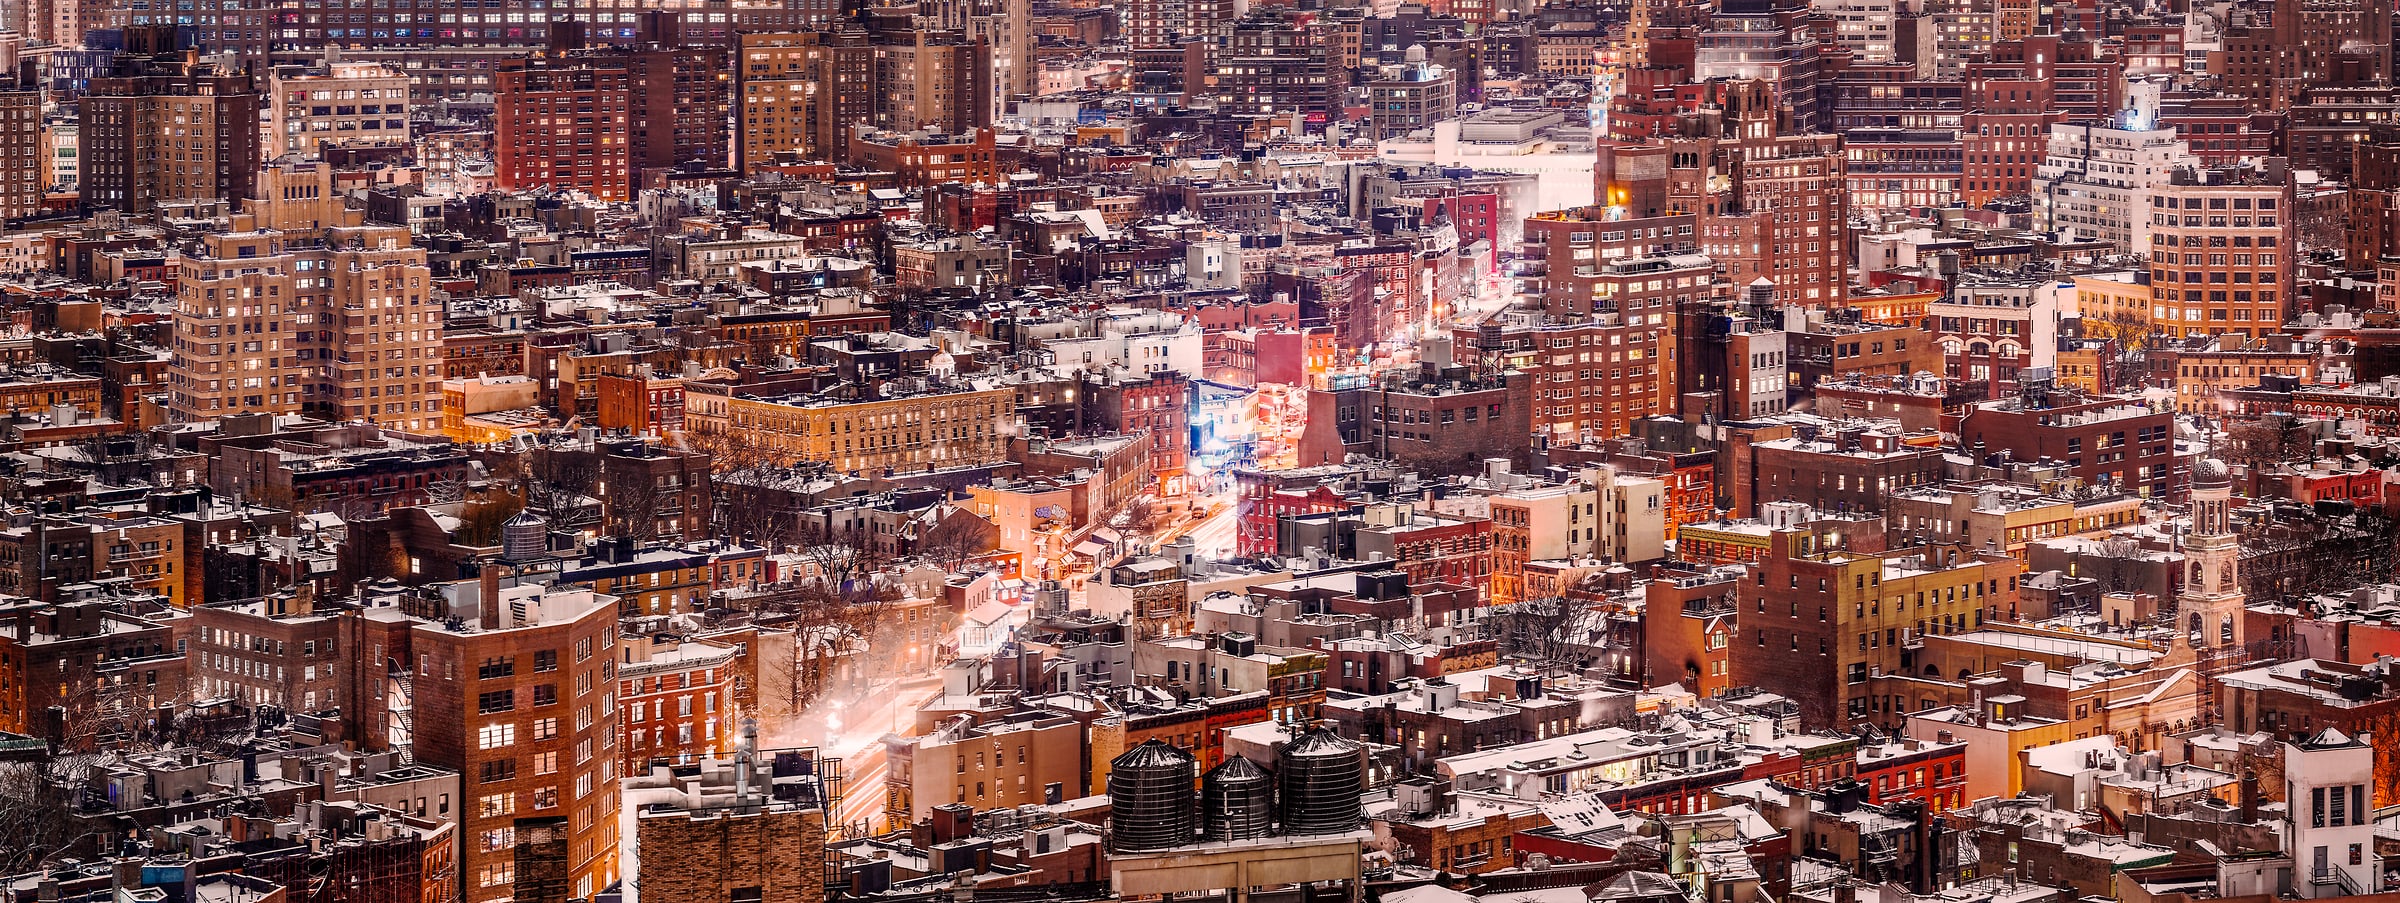 756 megapixels! A very high resolution, large-format VAST photo print of the West Village in NYC at night in winter snow; cityscape fine art photo created by Dan Piech in New York City